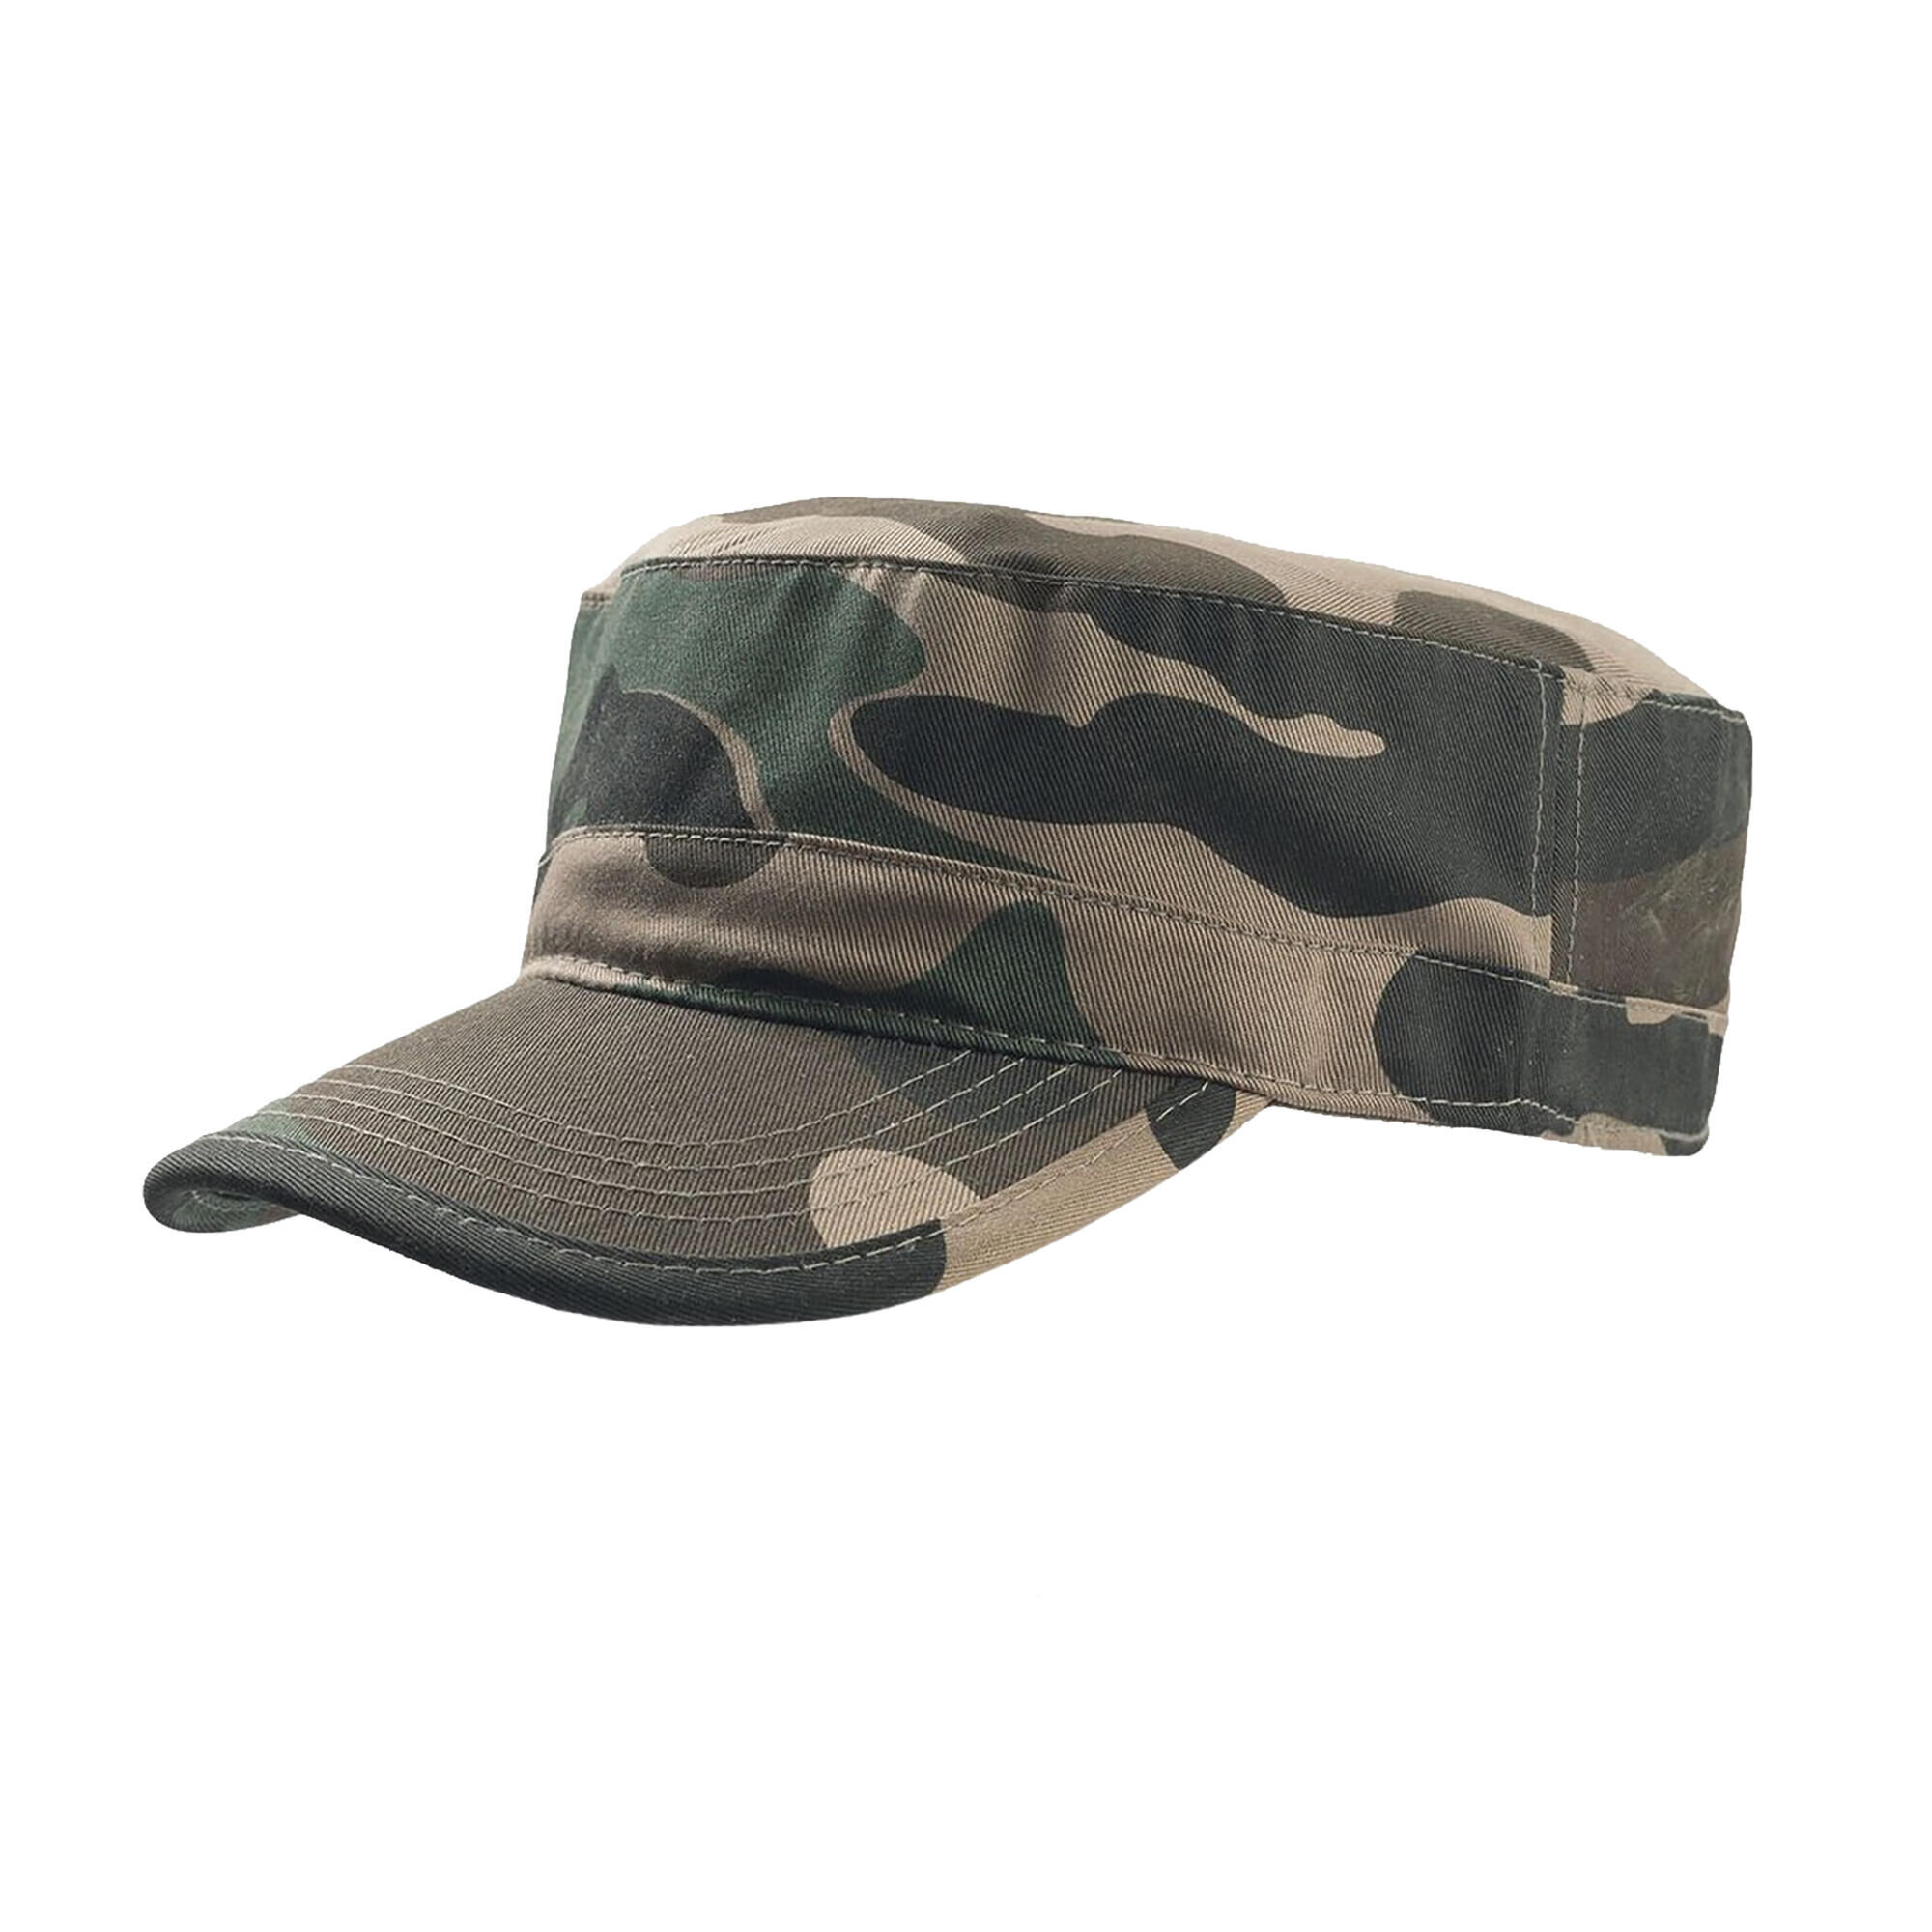 ATLANTIS Tank Brushed Cotton Military Cap (Pack of 2) (Camouflage)